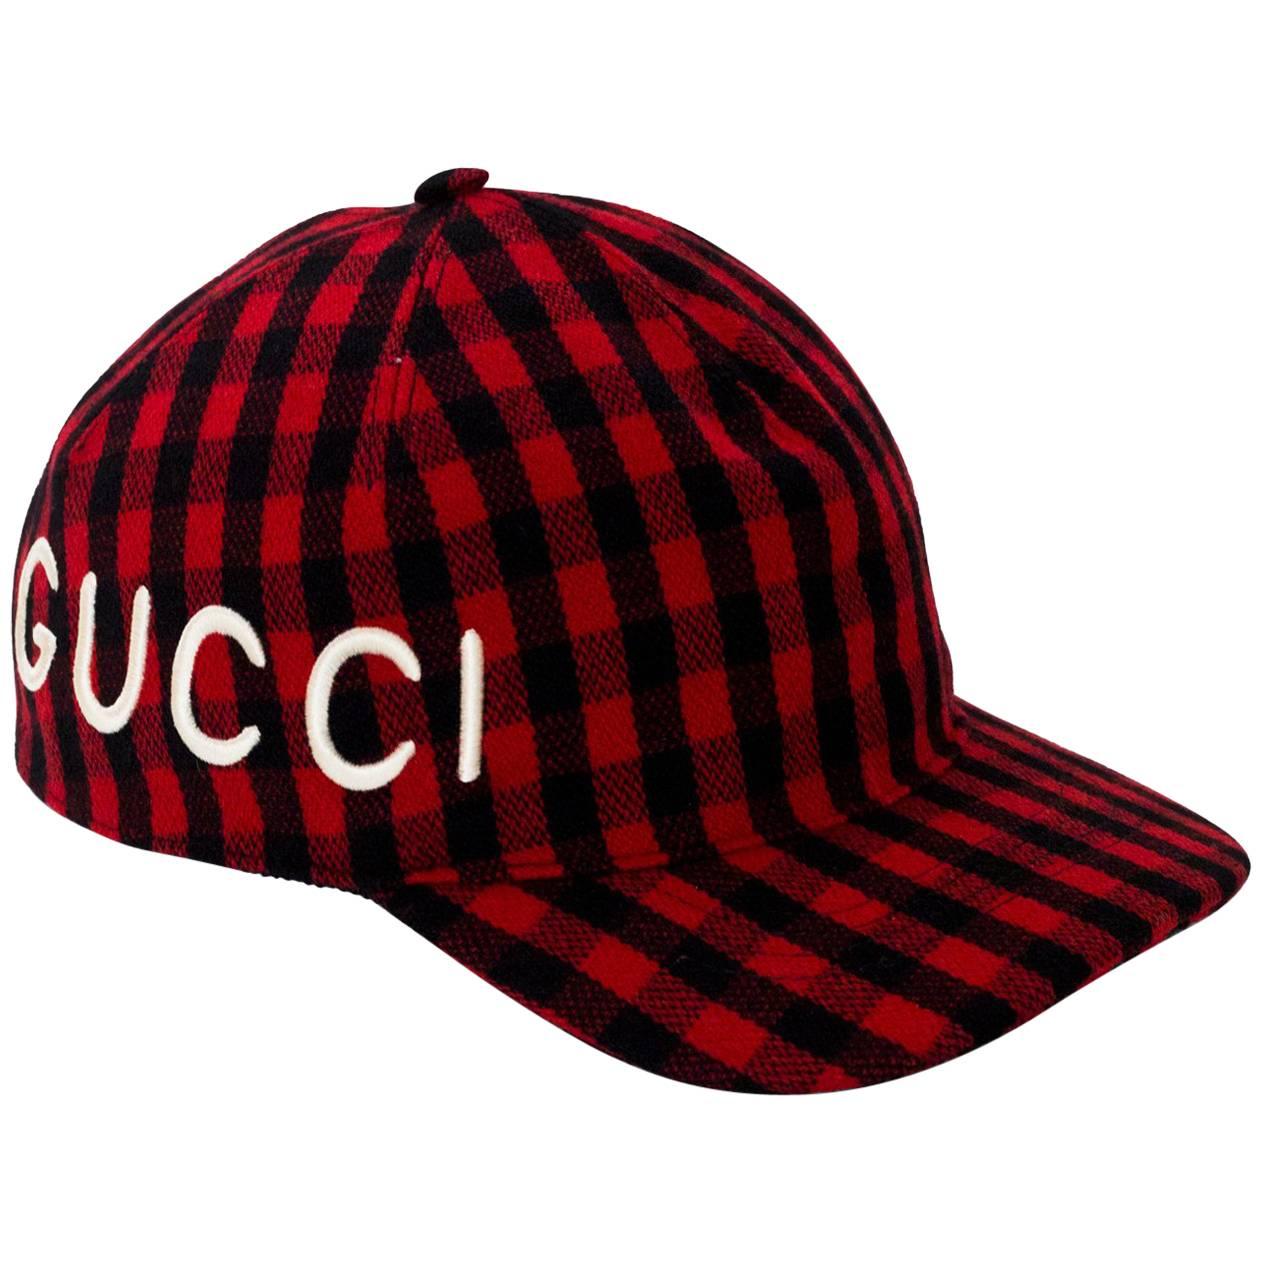 Gucci Black and Red Gingham Flannel Loved Baseball Cap sz M/58 